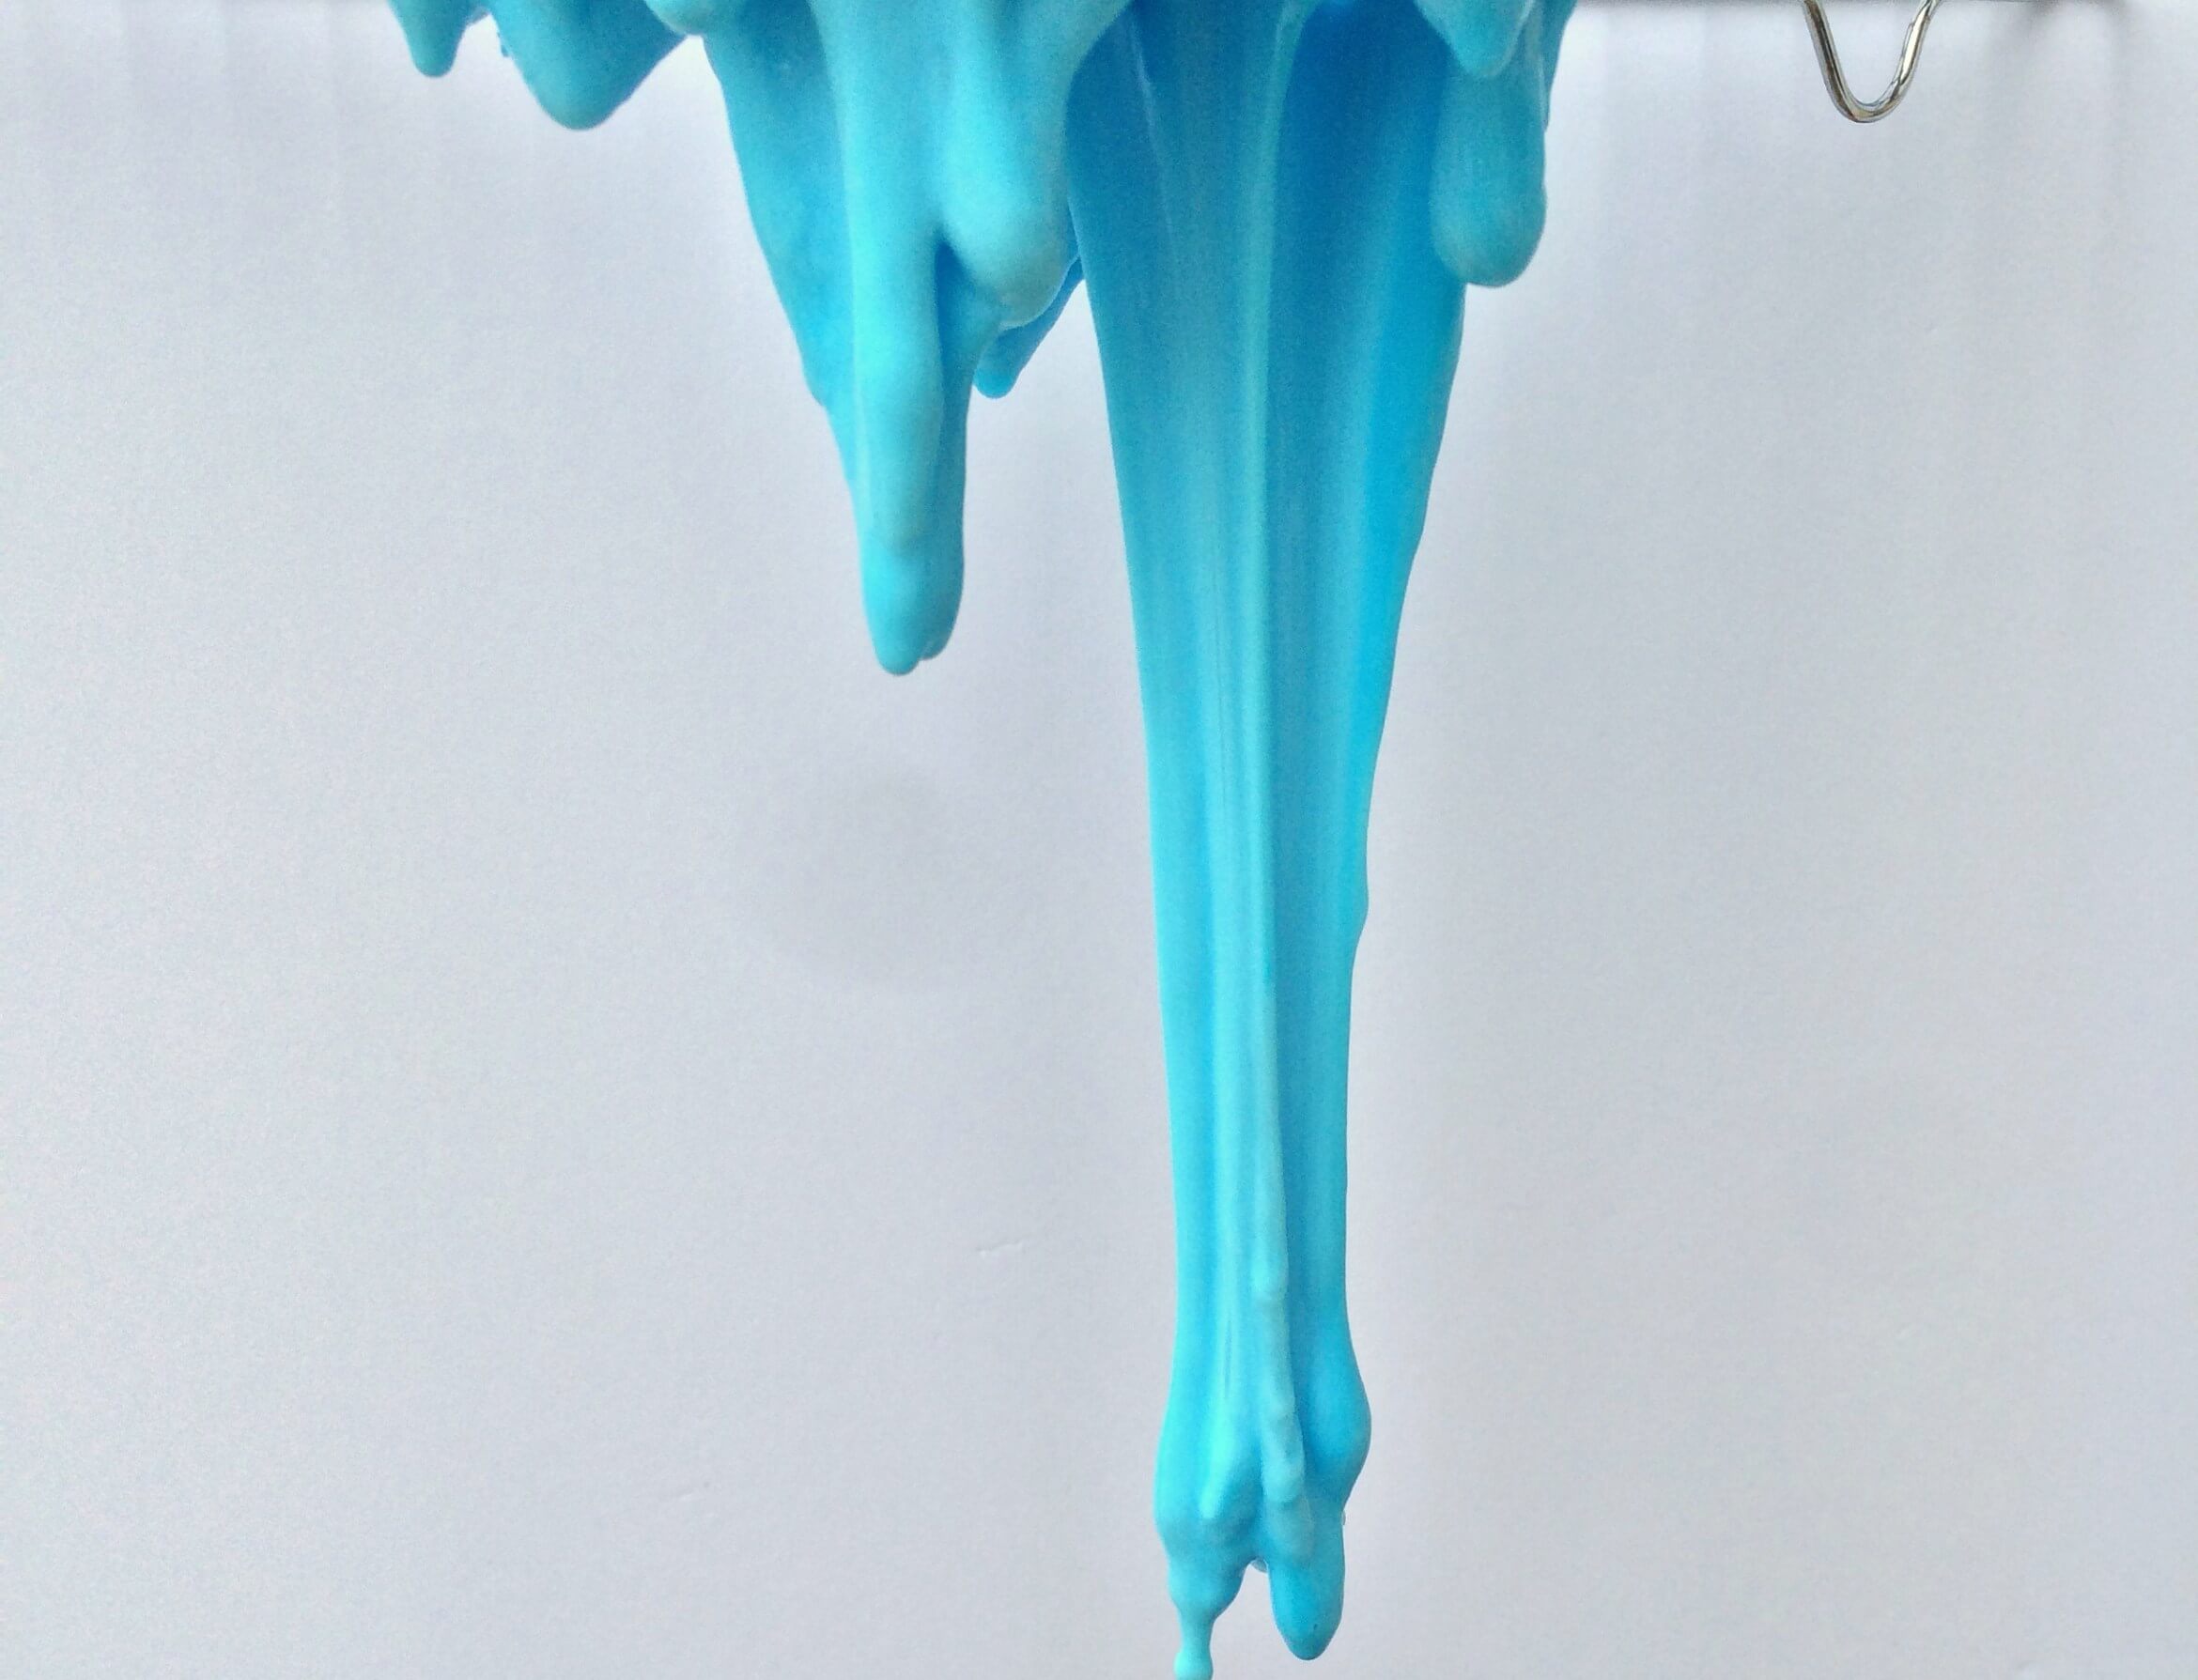 Dripping Icicle Experiment